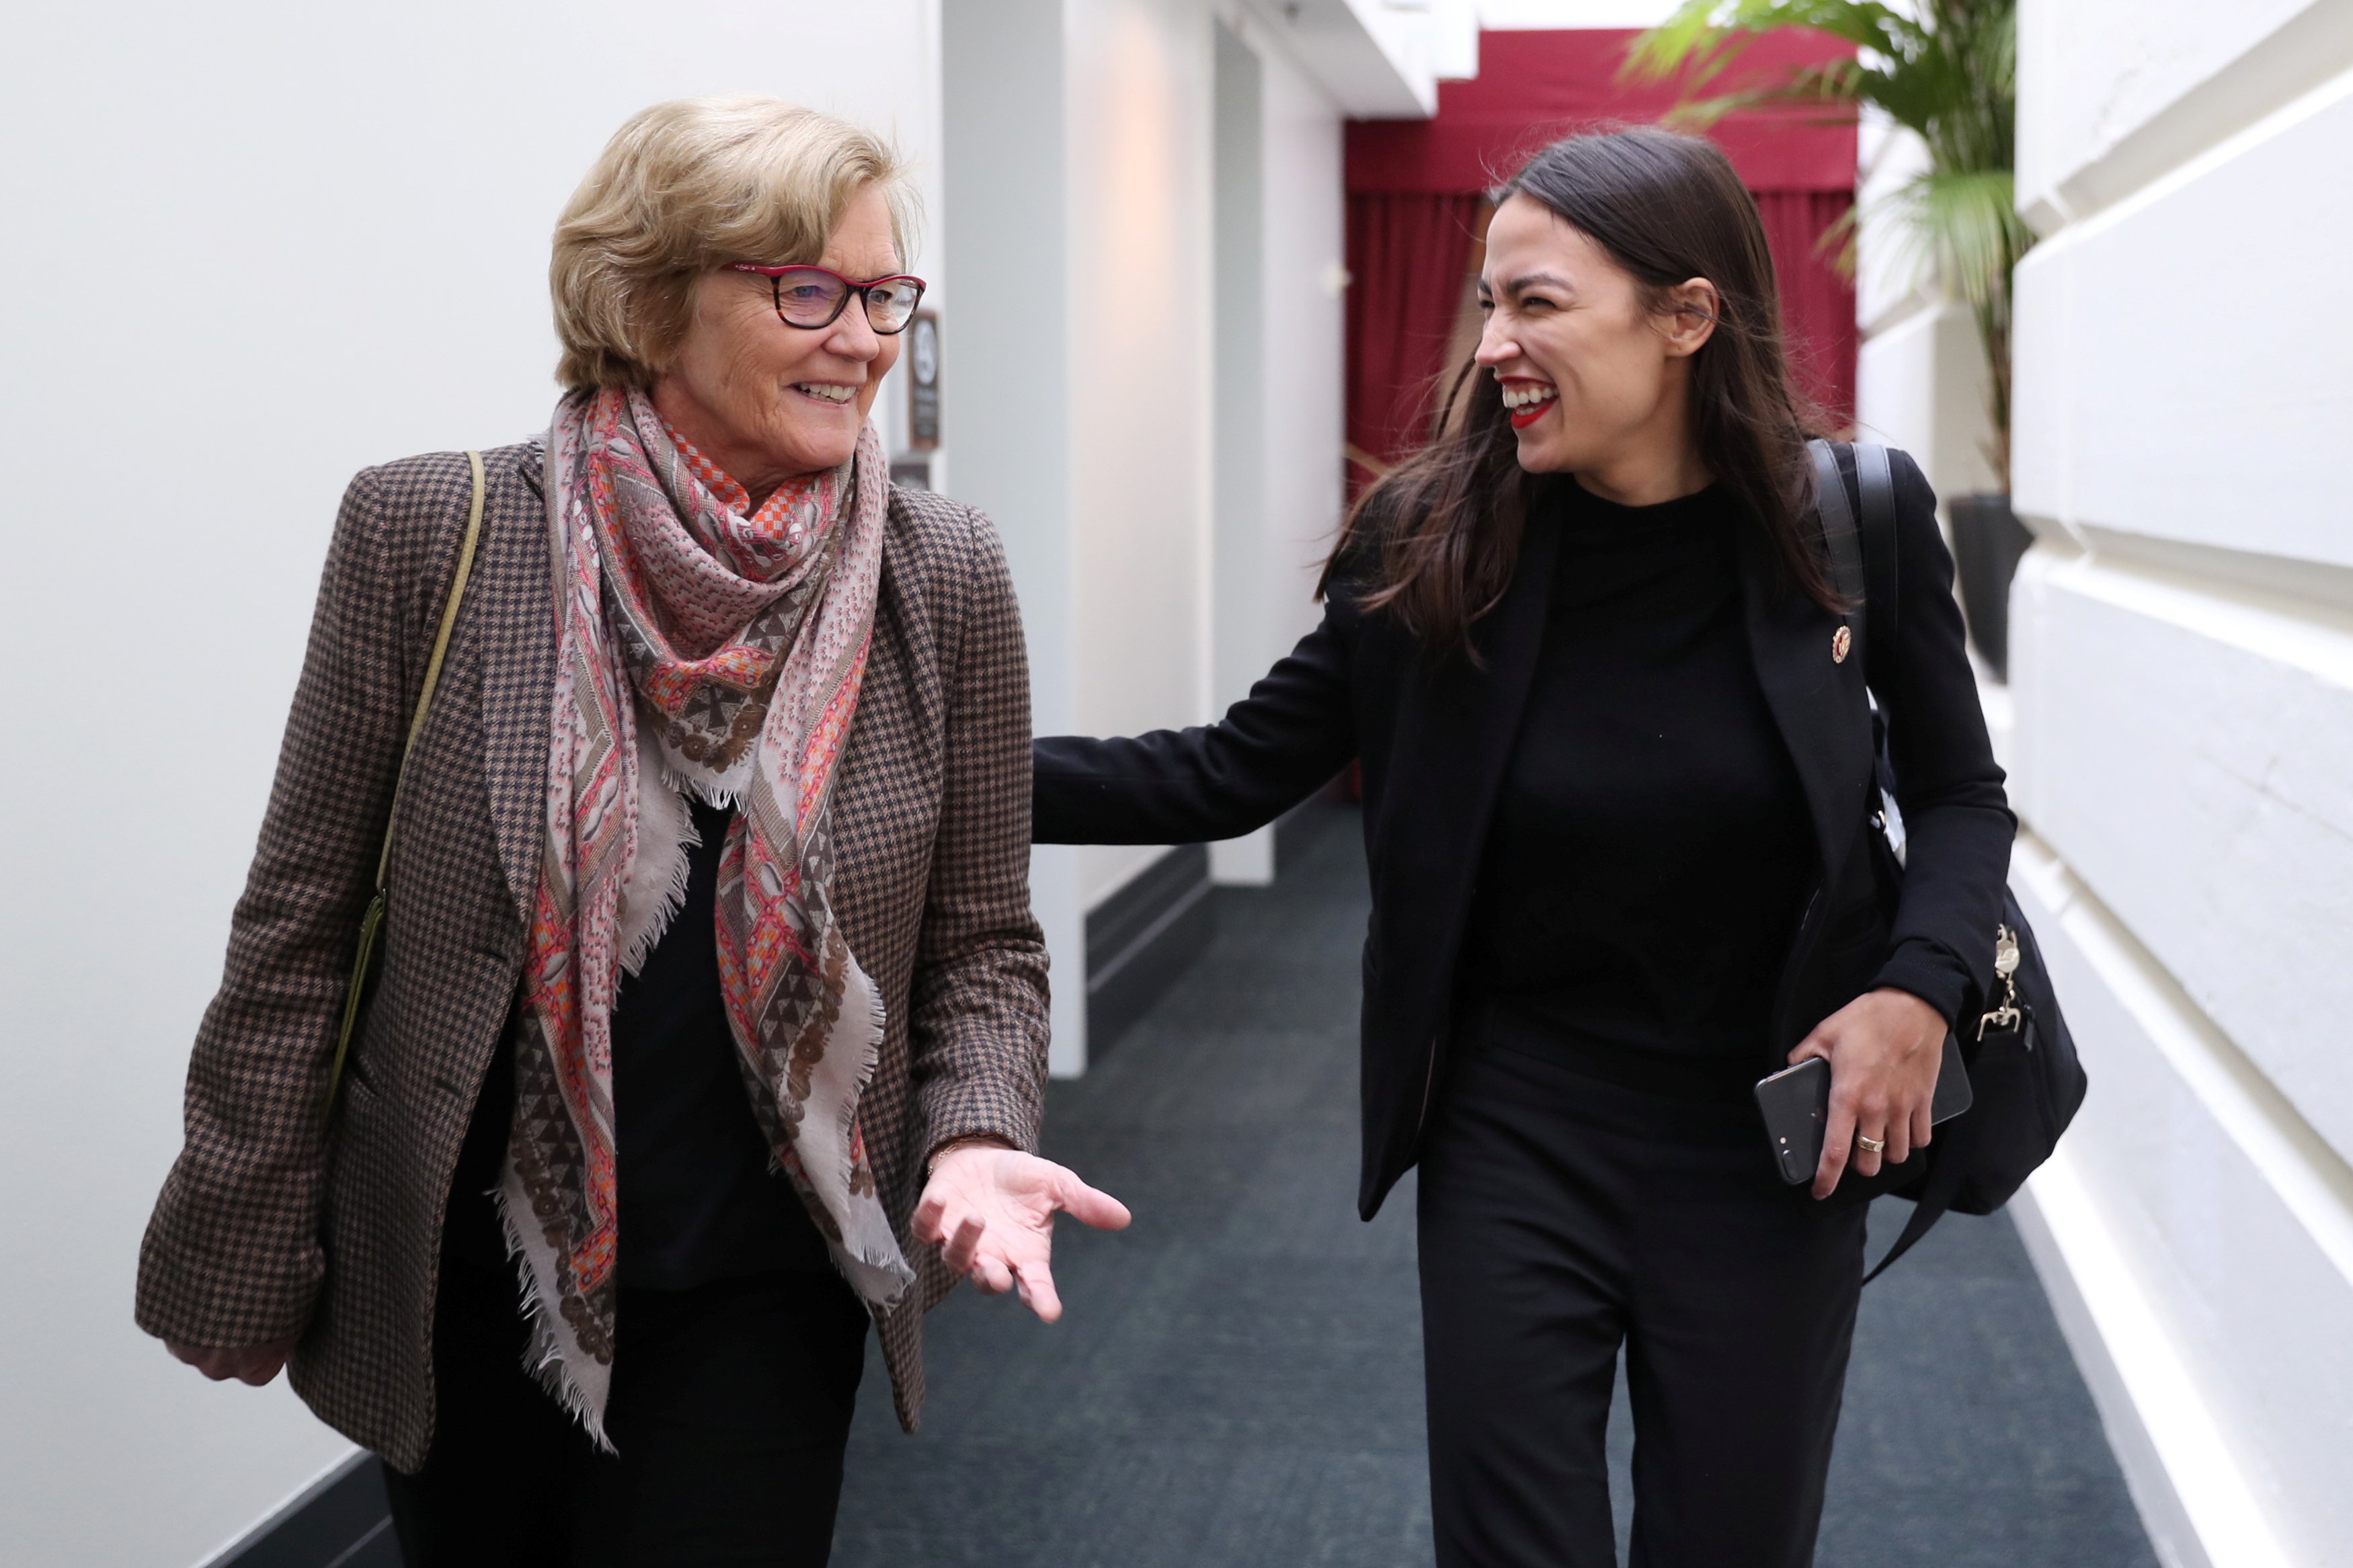 U.S. Representative Pingree and Representative Ocasio-Cortez arrive for a House Democratic party caucus meeting at the U.S. Capitol in Washington